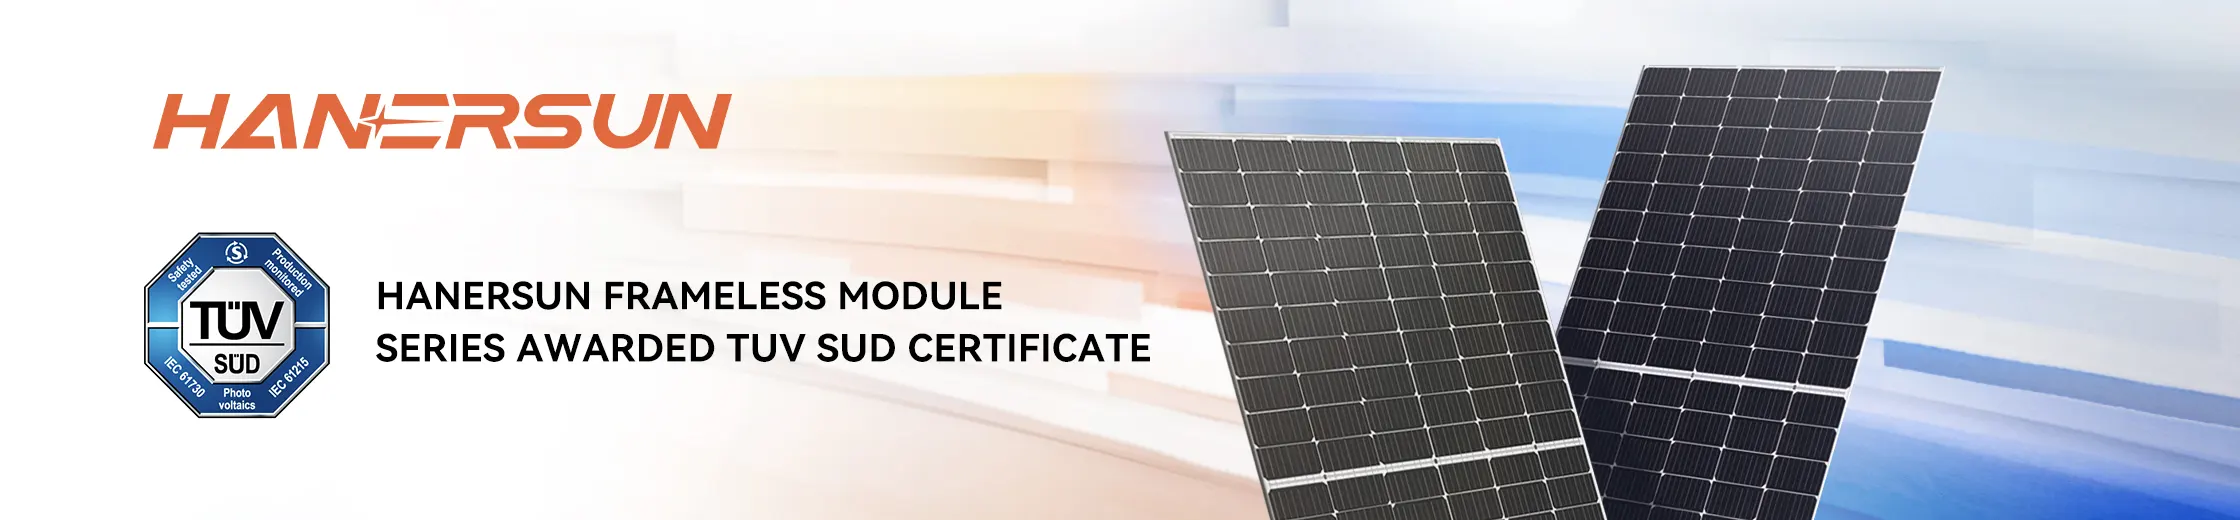 Hanersun Frameless PV module series received TUV SUD certification and Went on Sale